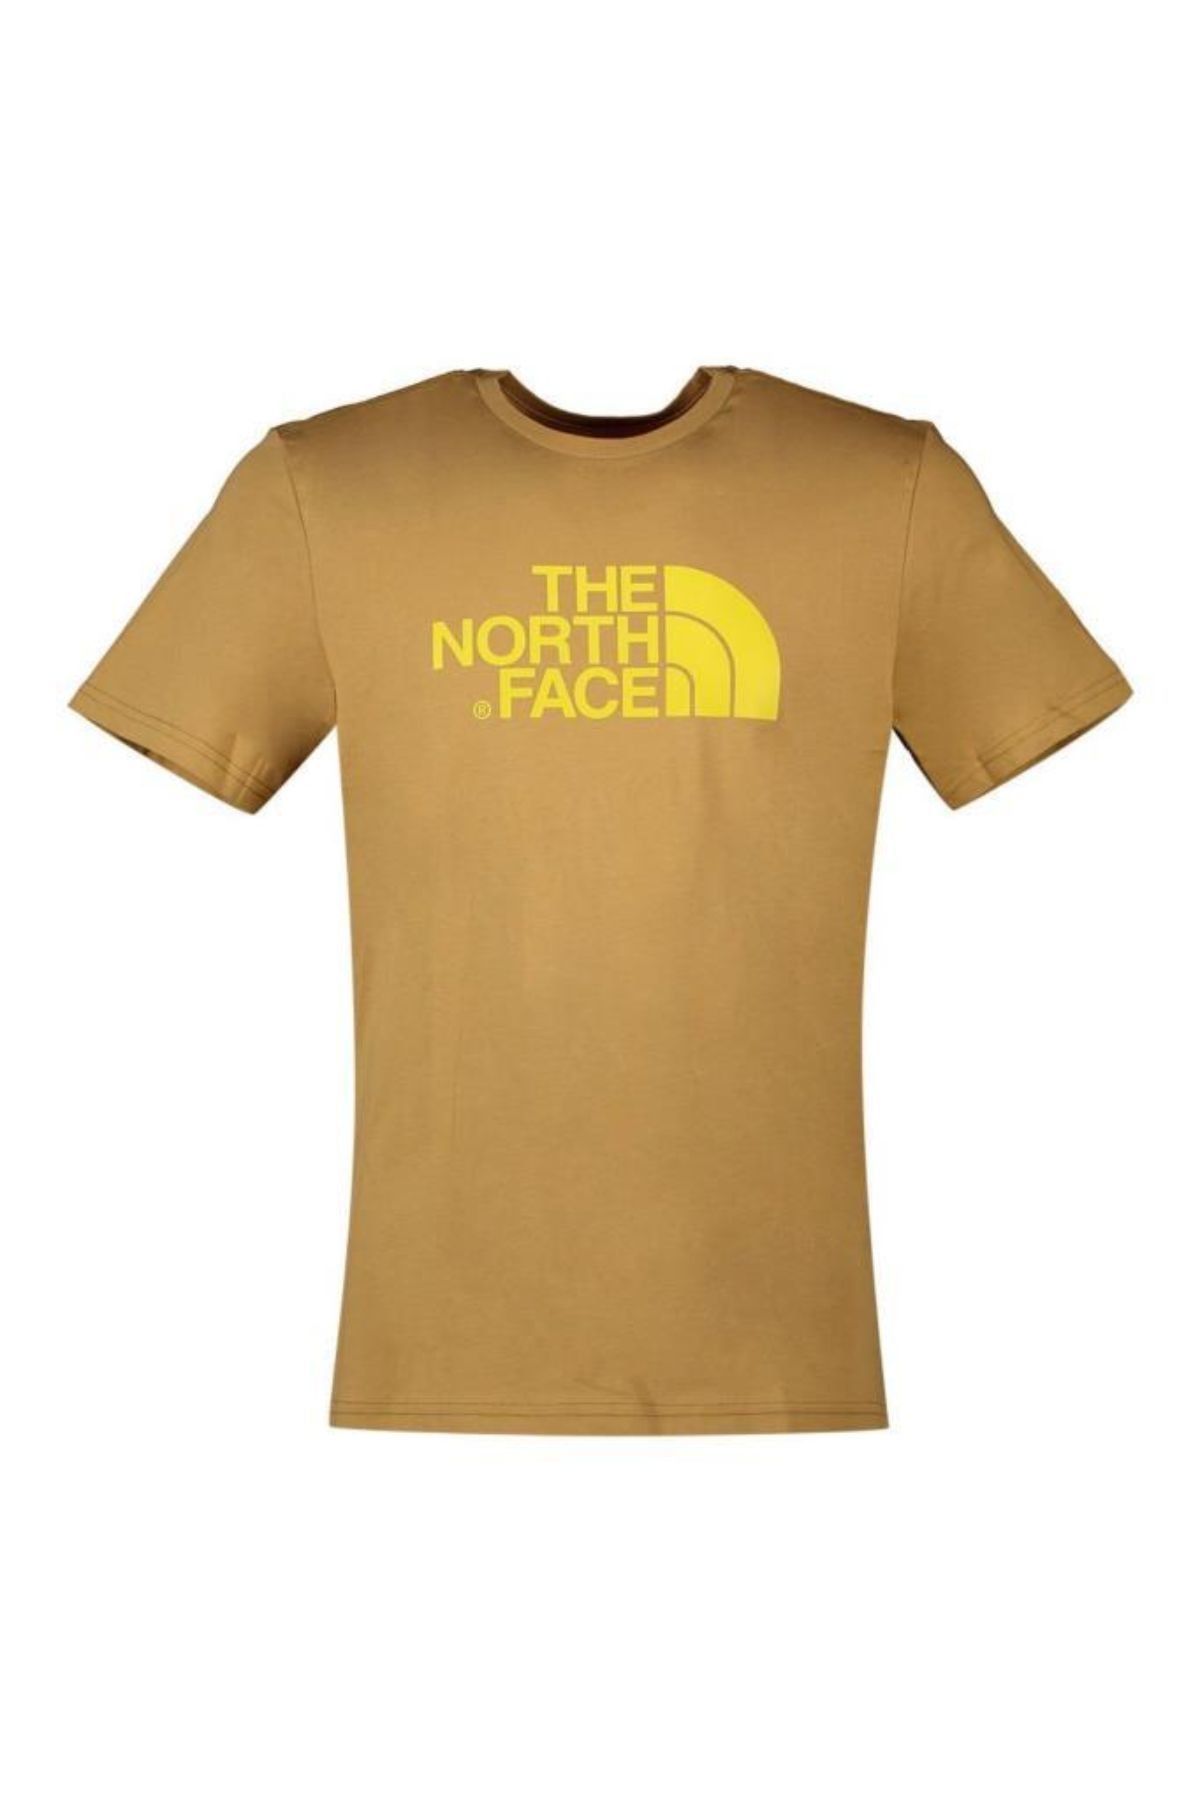 The North Face The North Face Easy Erkek T-Shirt Haki